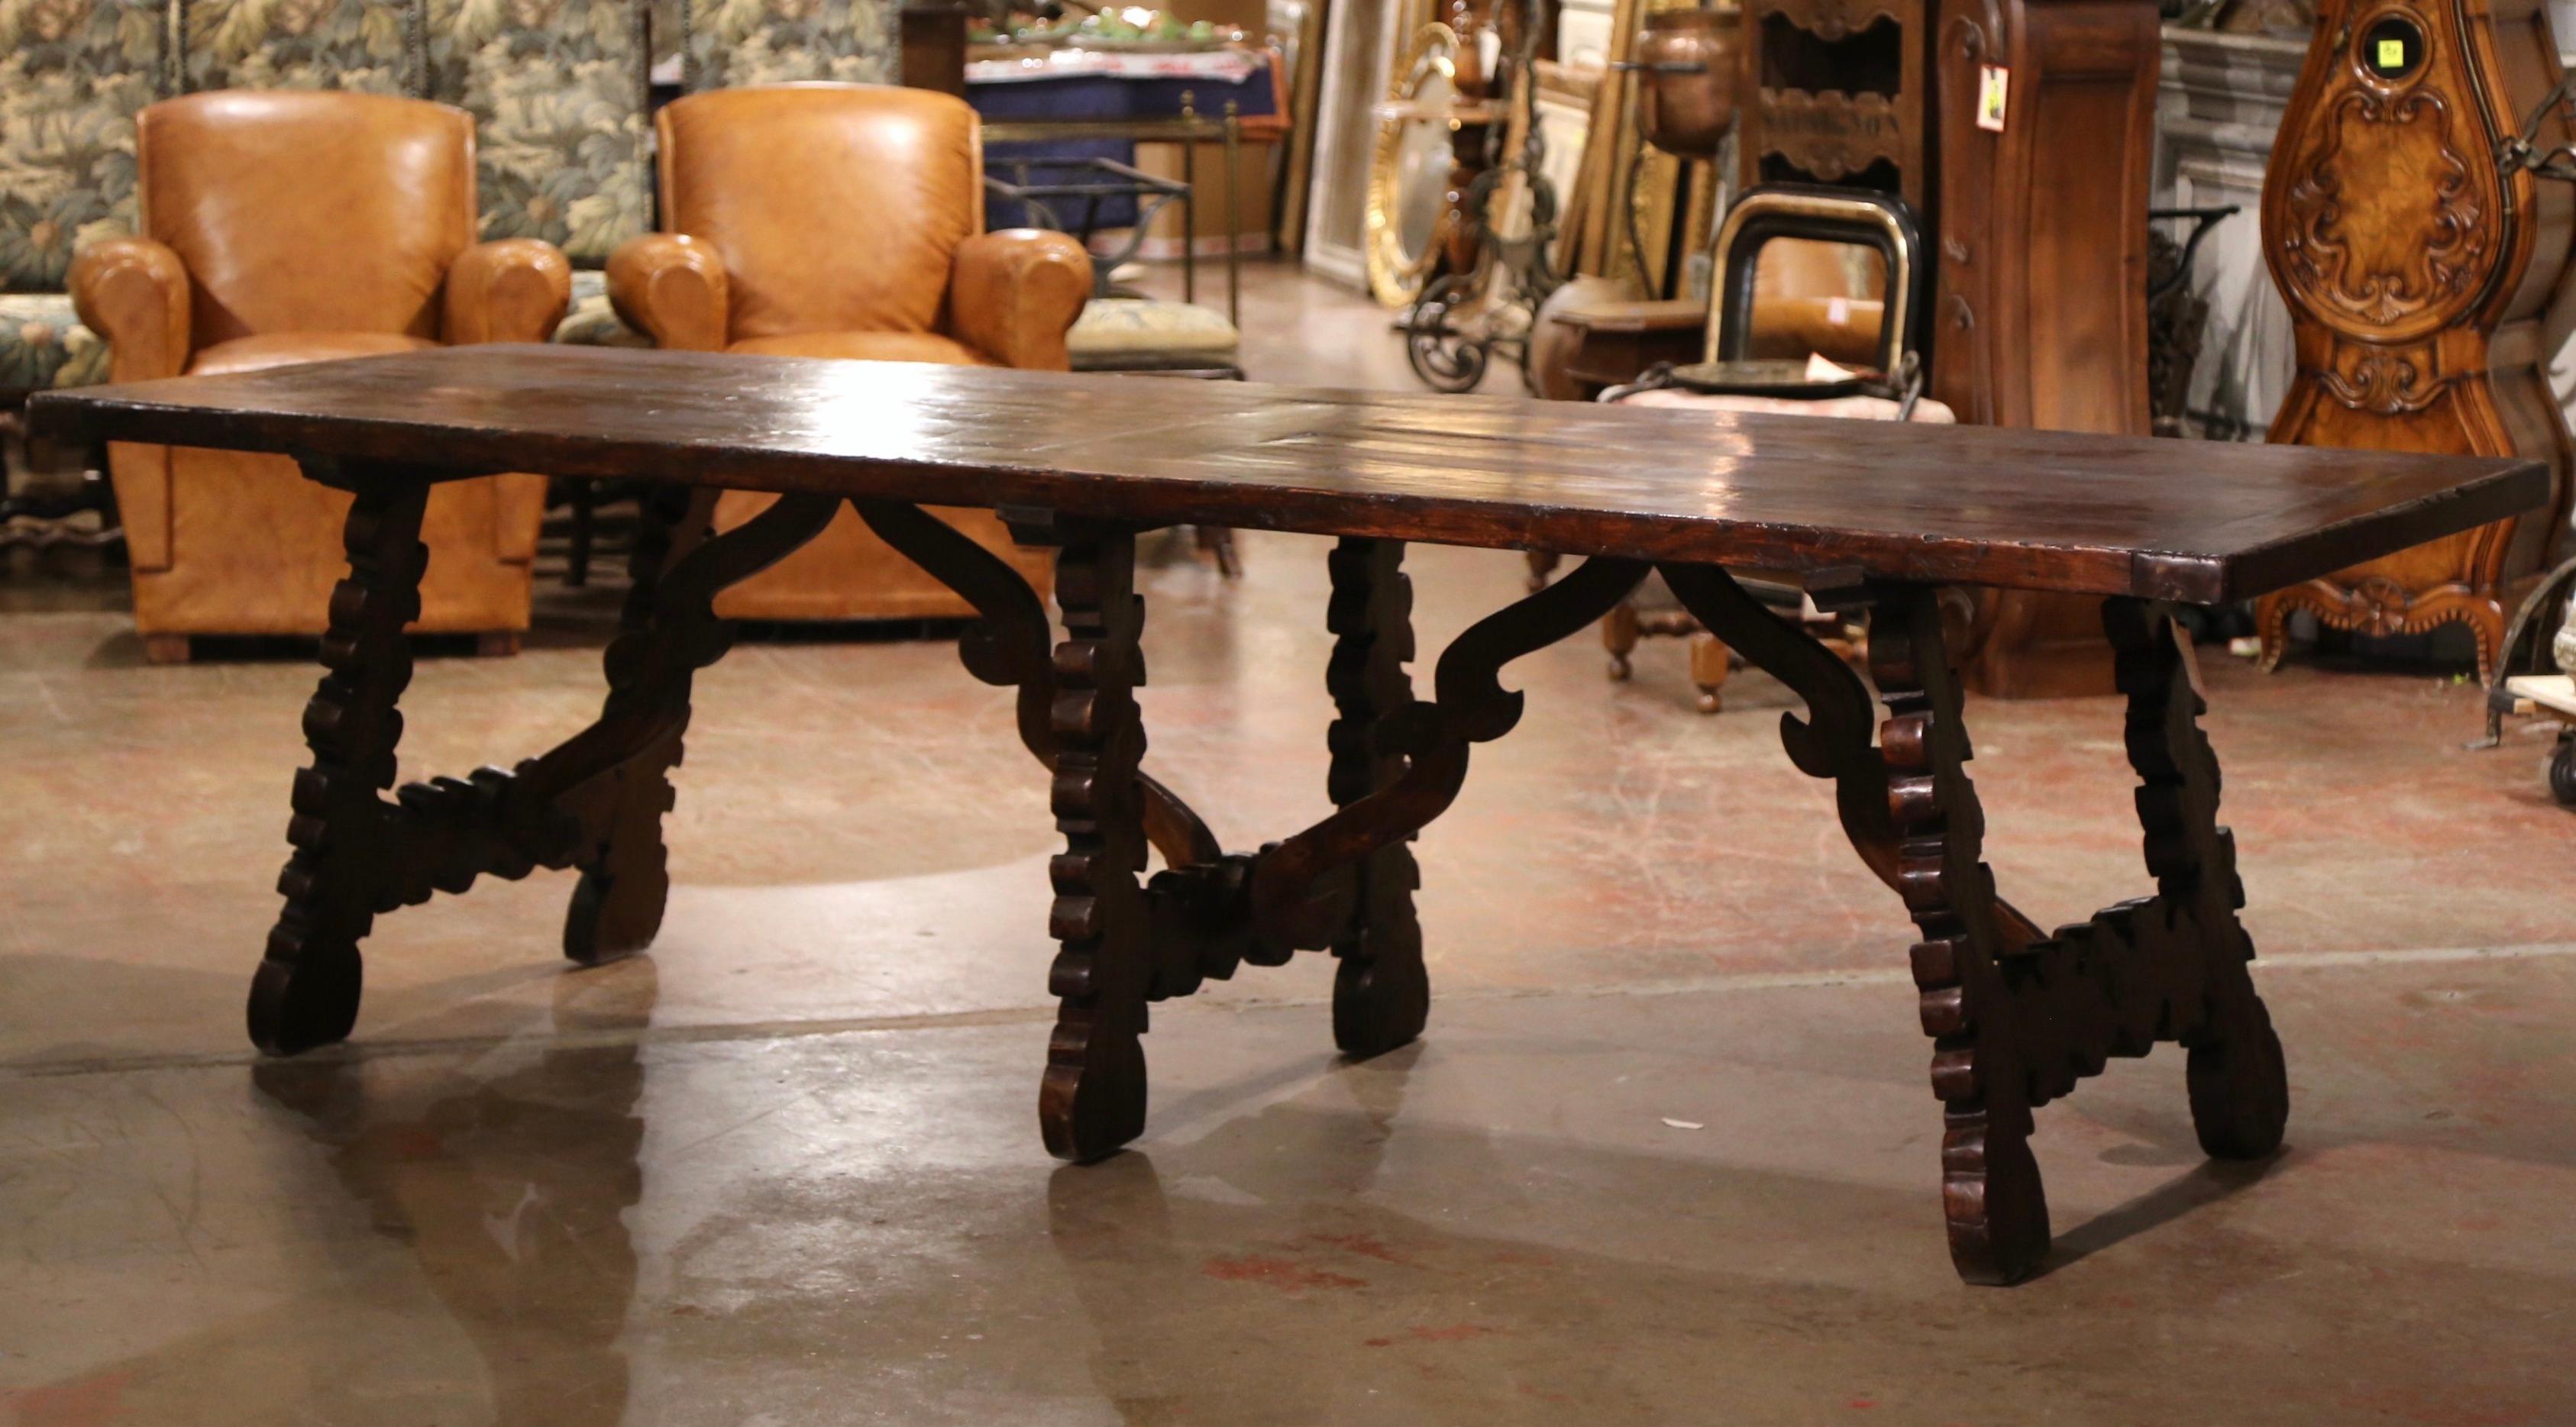 This elegant, antique dining room table was crafted in Spain, circa 1880. Almost 9 feet long, the table stands on three intricate scrolled pedestal legs, each connected with a carved cathedral form stretcher; the rectangular surface is dressed with